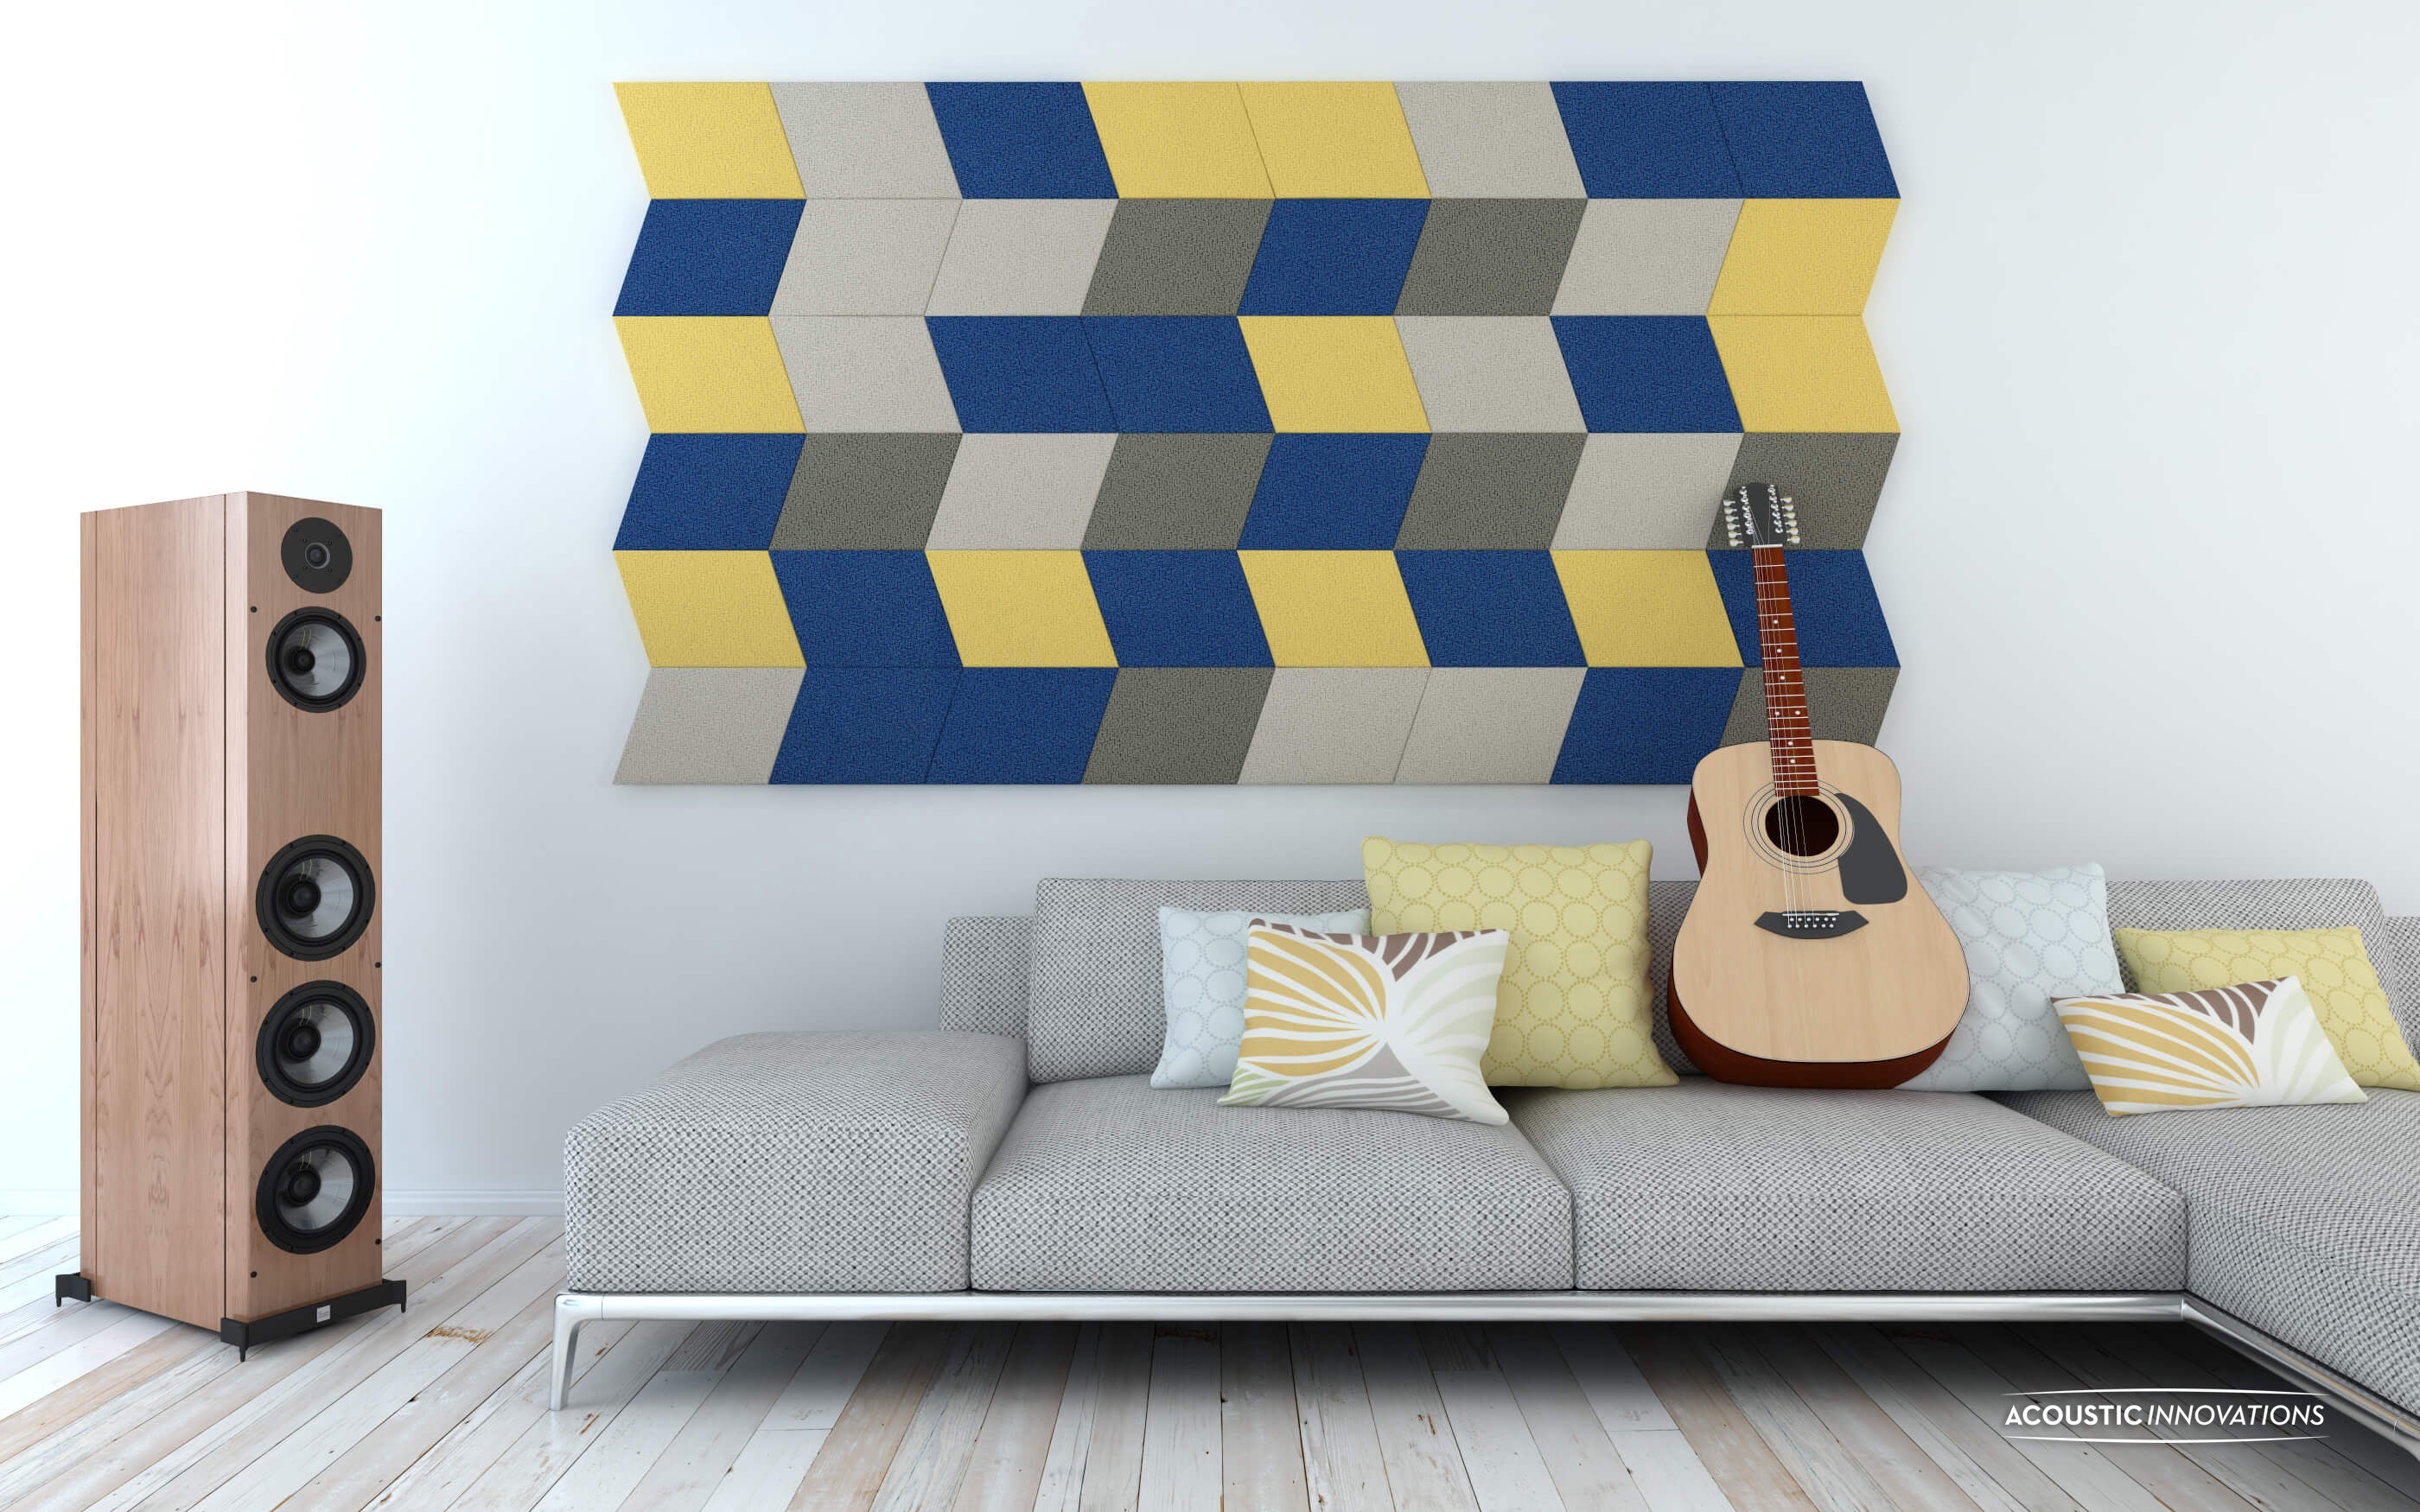 An image showing decorative and functional sound dampening panels from Acoustic Innovations. The panels are parallelograms in a pleasing color scheme, arranged together to form a visually pleasing large panel.